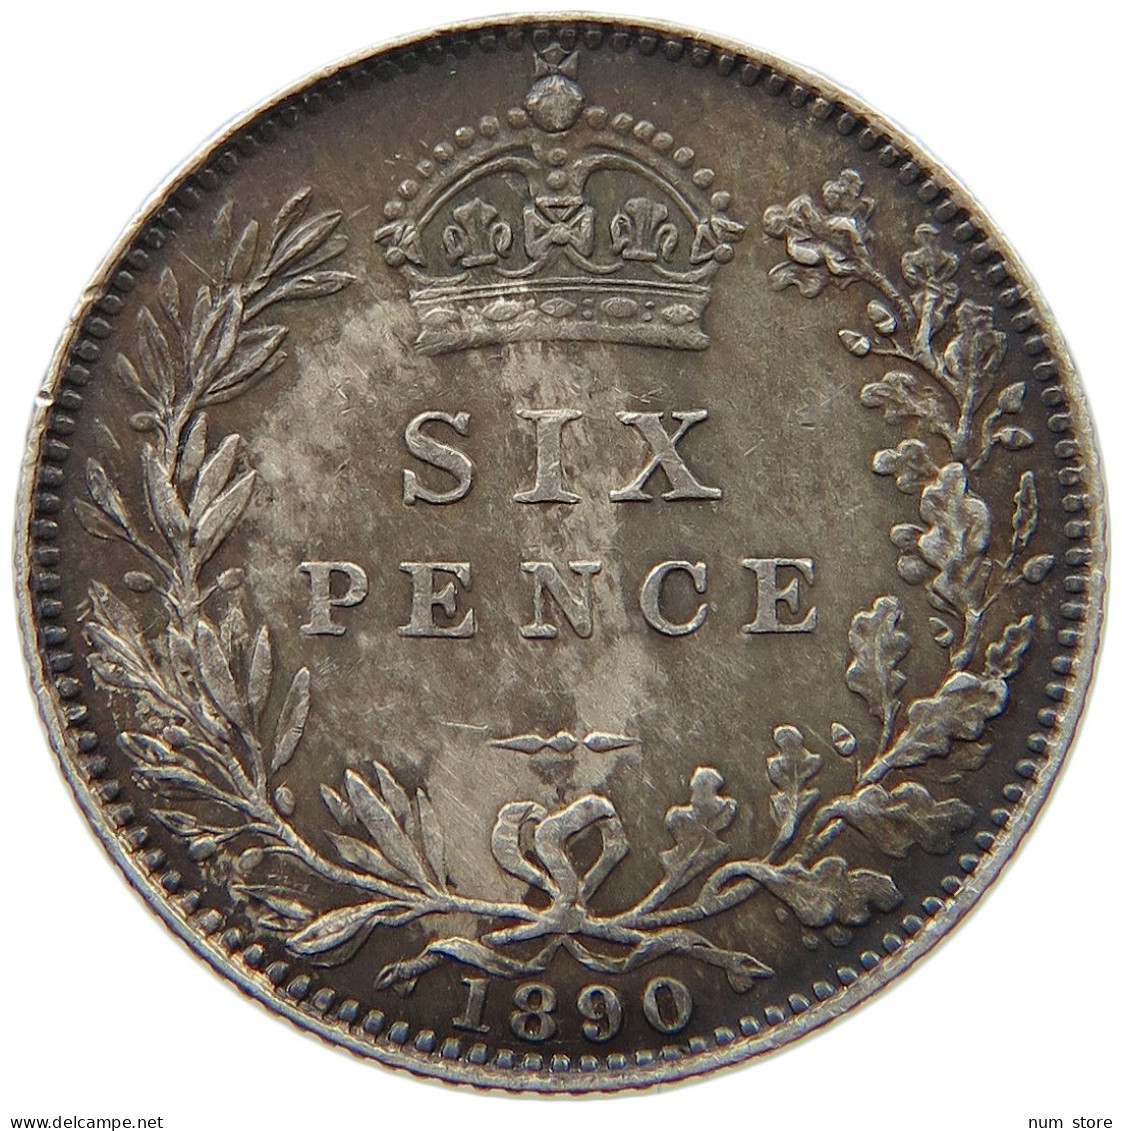 GREAT BRITAIN SIXPENCE 1890 Victoria 1837-1901 #t078 0181 - H. 6 Pence